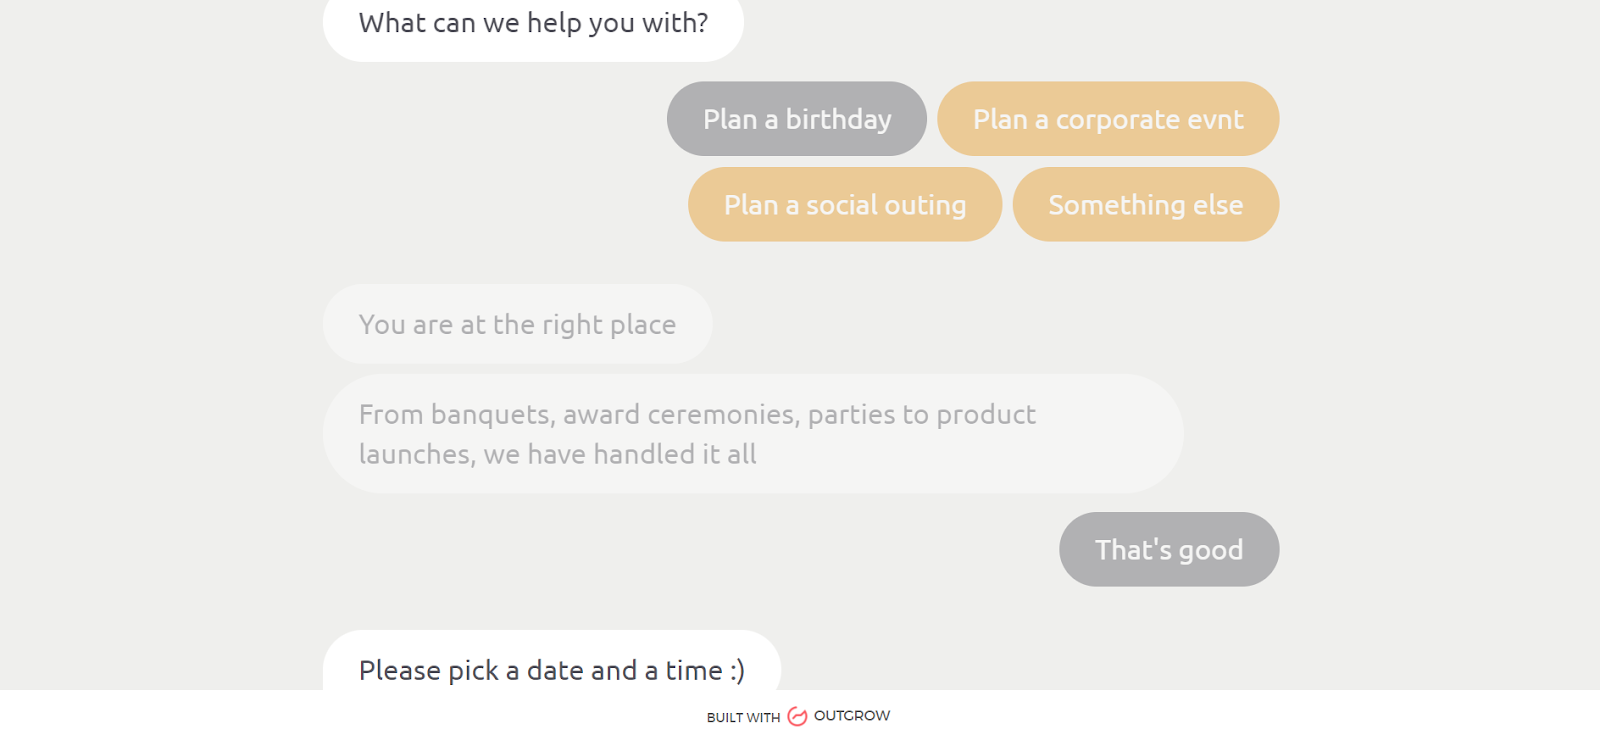 Outgrow's event planning chatbot